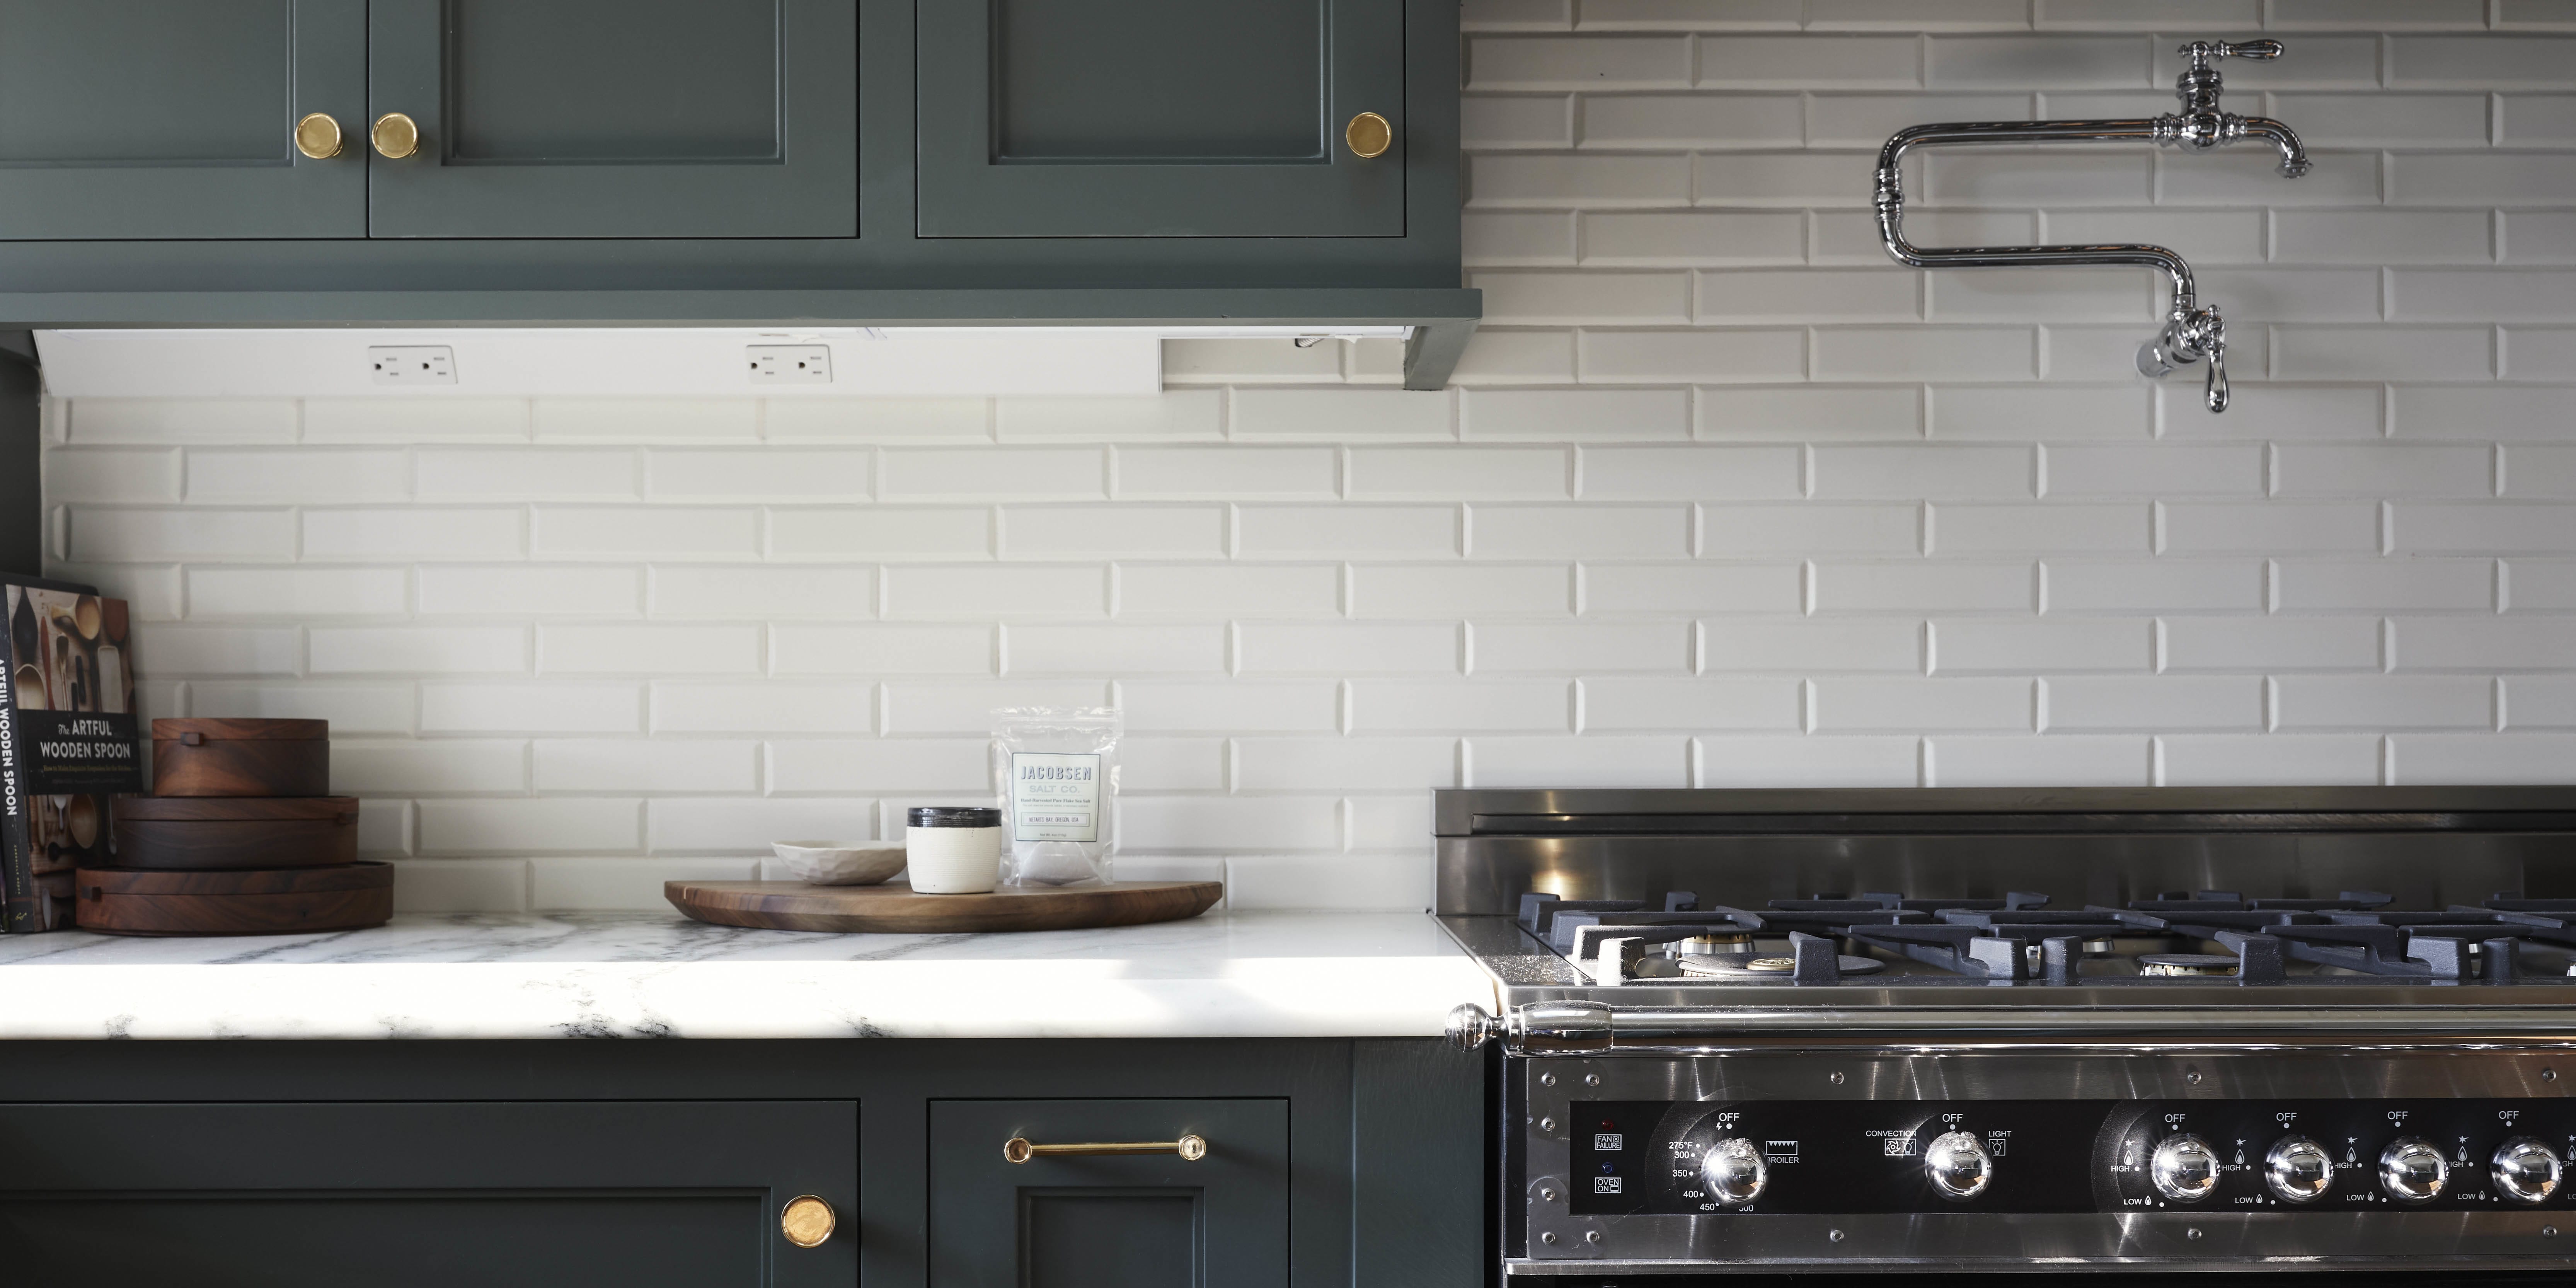 Tips for Using Unexpected Colors in the Kitchen